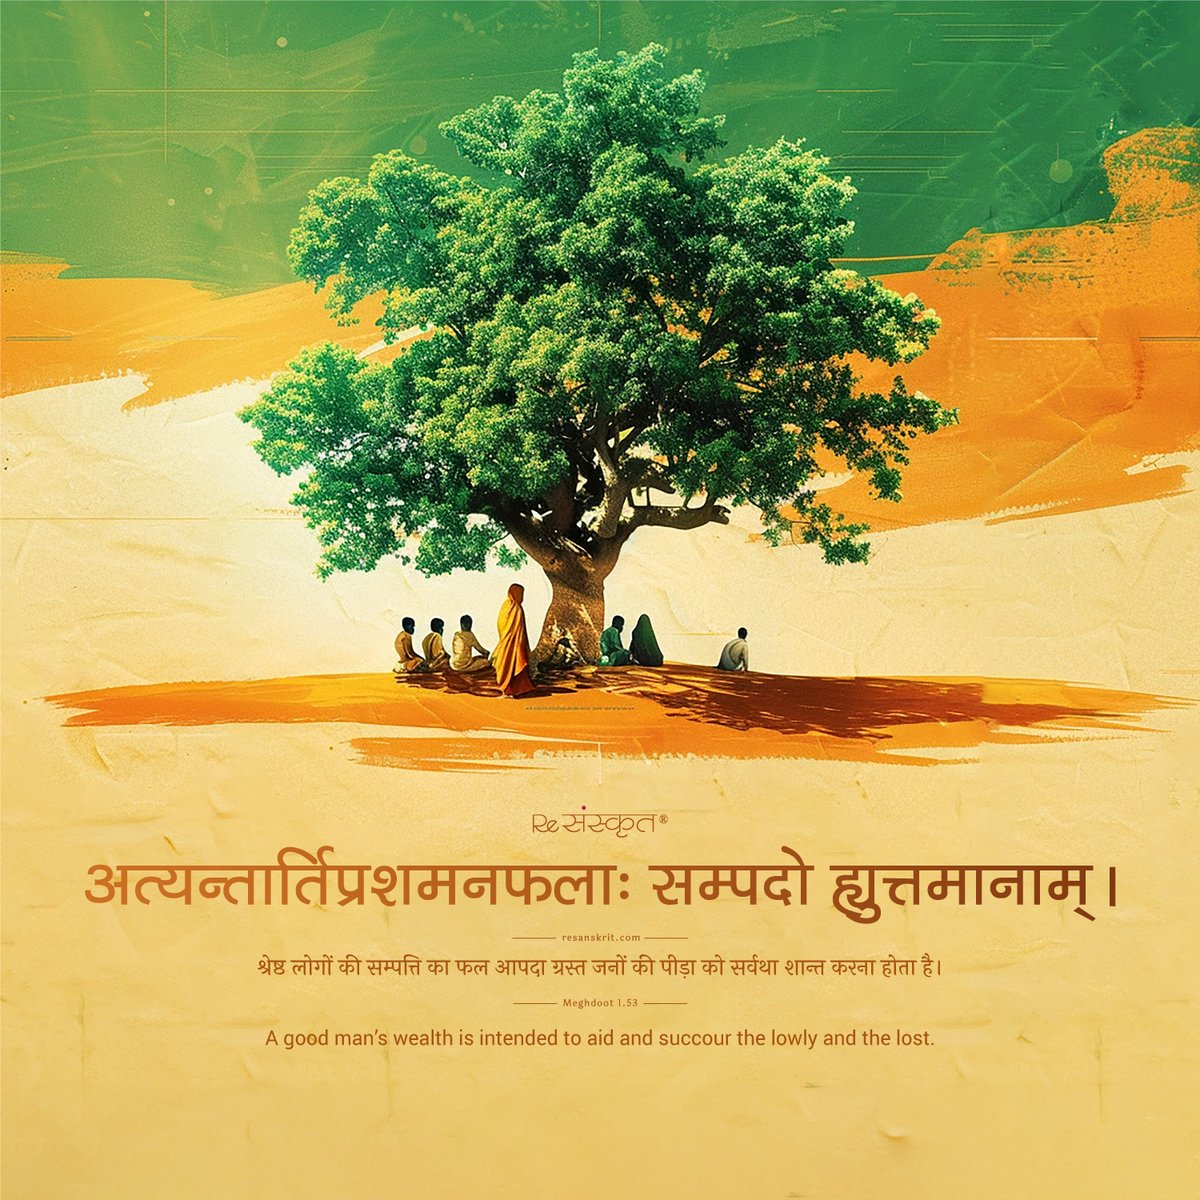 This quote from Kalidas suggests a good person's wealth shouldn't just enrich them, but be used to actively help those struggling ('lowly and lost'). The tree symbolizes the shadow it offers to weary travelers.  Source - Kalidasa's Meghdoot 1.53 #sanskrit #india #kalidas